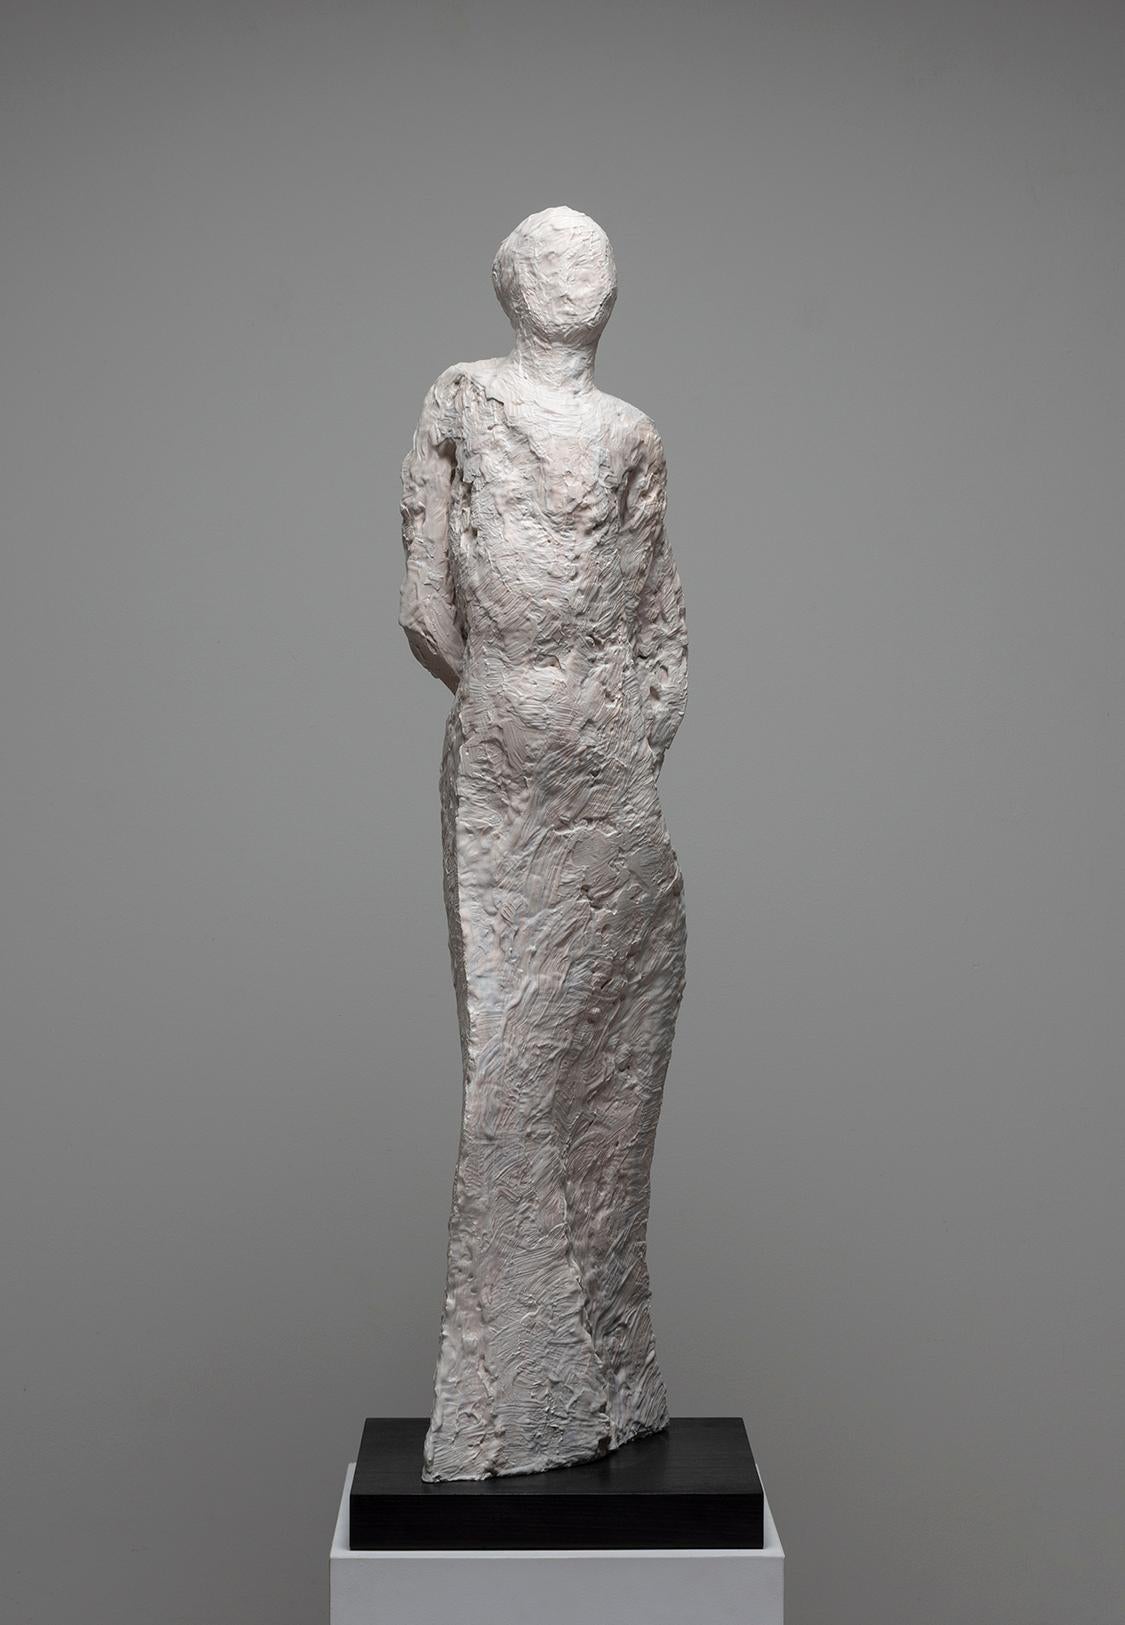 Michael O'Keefe Figurative Sculpture - On the Conception of the Hip